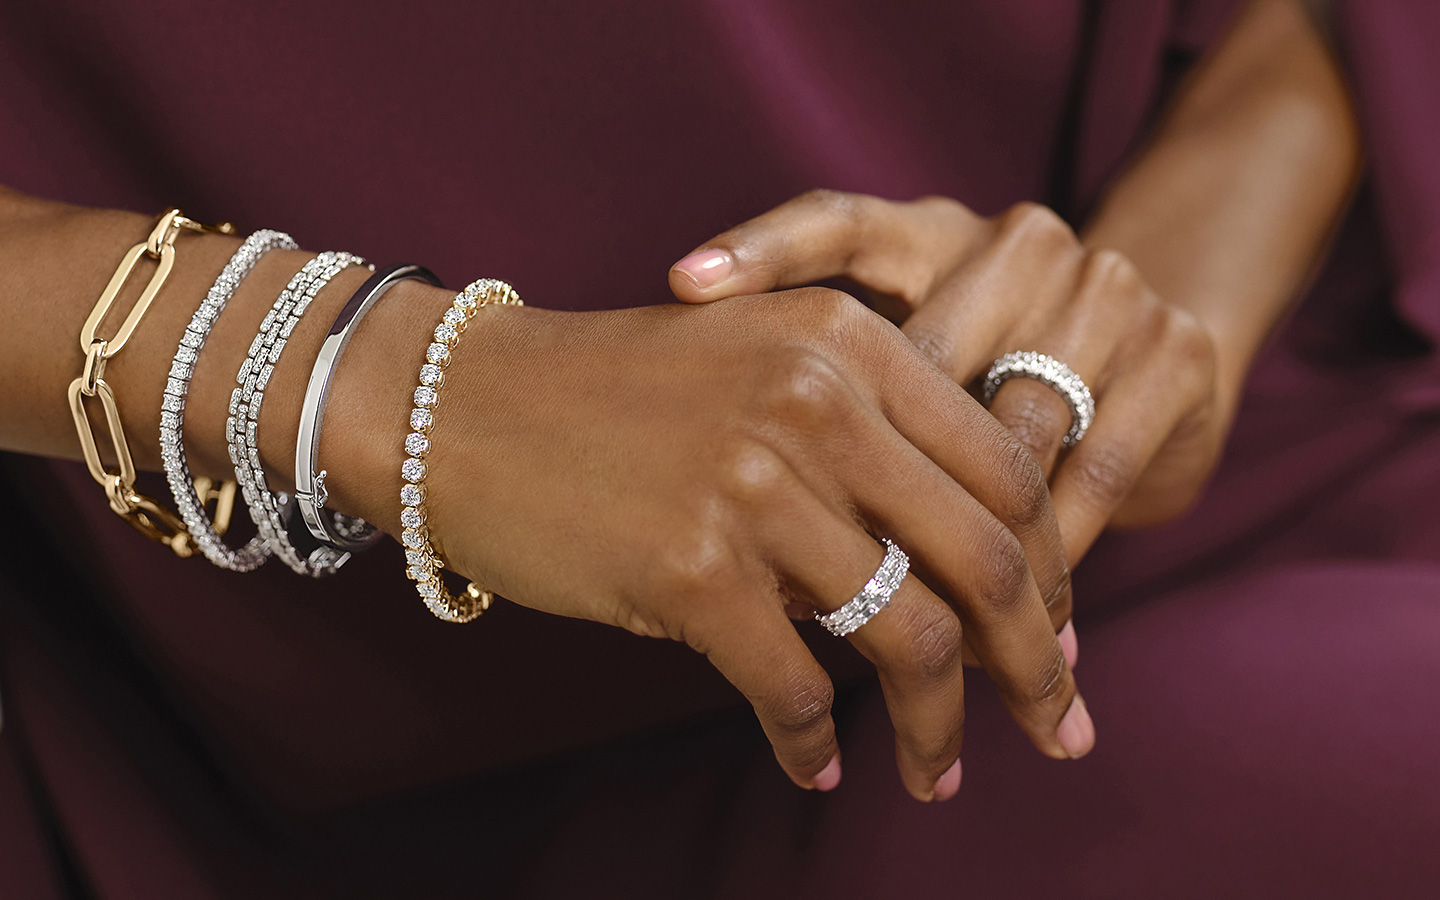 Photo of a woman’s hands, she is wearing gold and diamond bracelets.